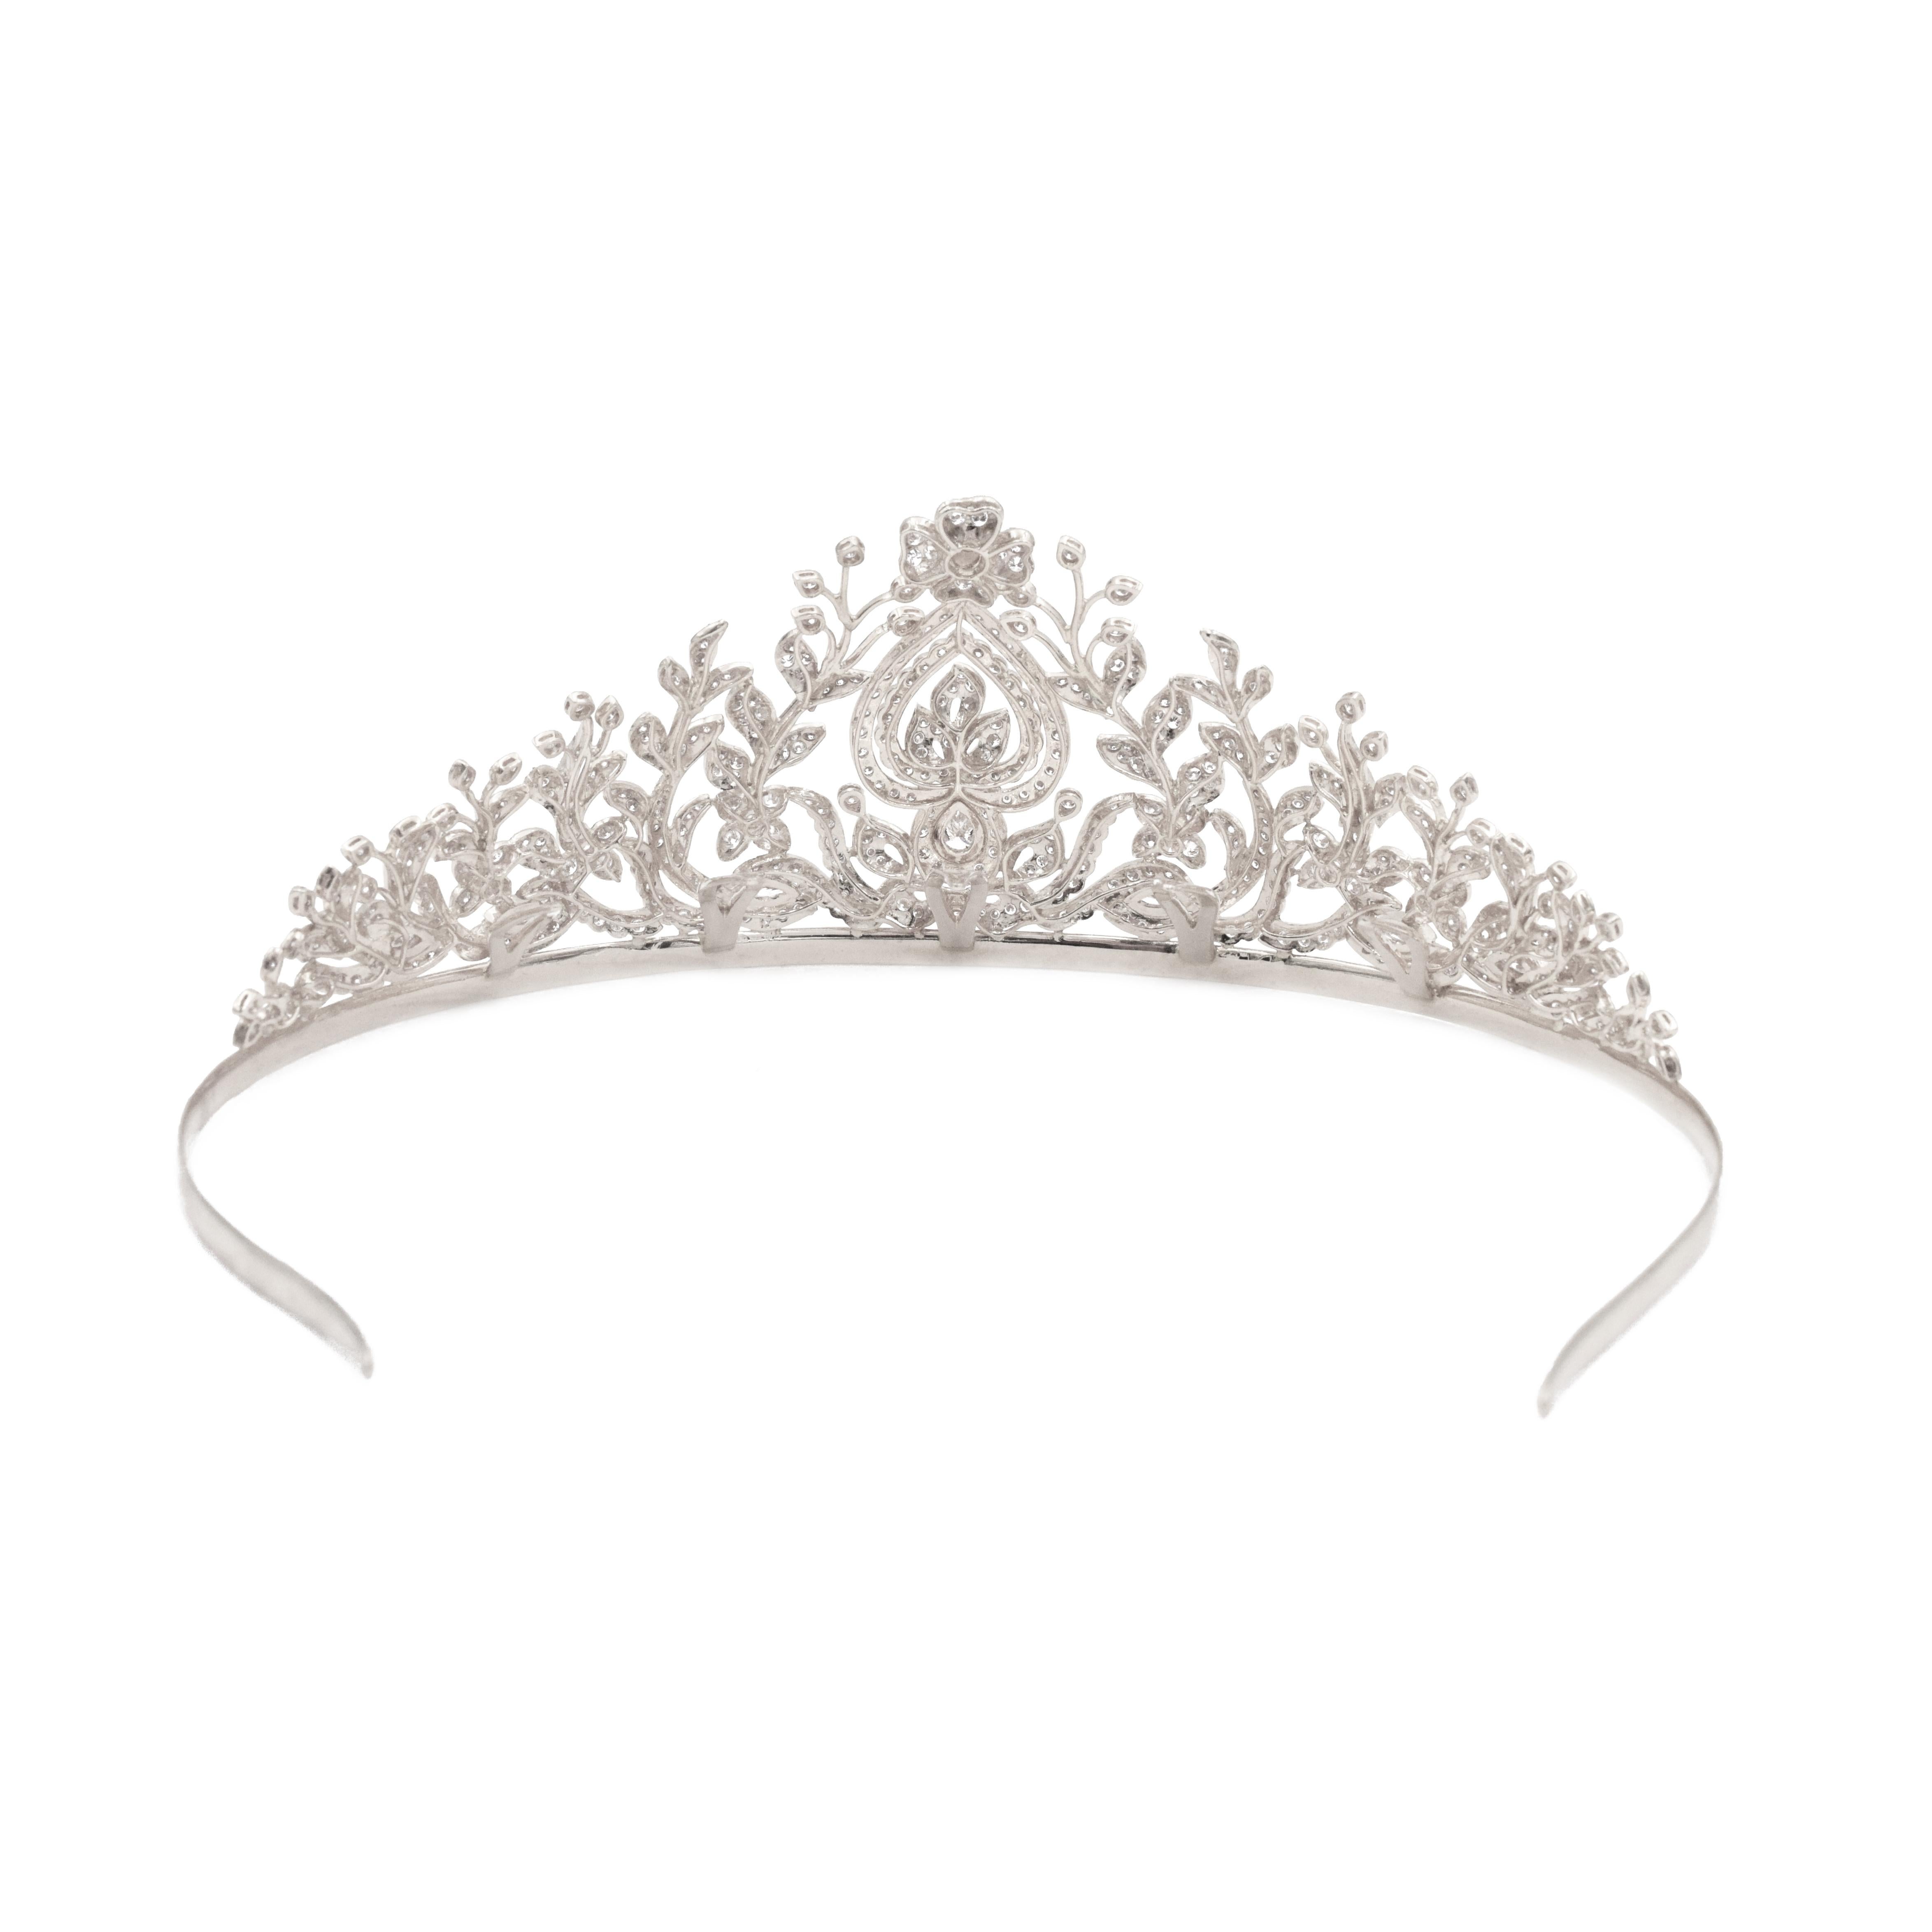 Diamond tiara, 
The floral design of the tiara is set with multiple round brilliant cut diamonds, six marquise cut diamonds and one pear shape diamond weighing total of approximately 20carats.
measures 5.5 inches in width and it's 2.25 inches high.